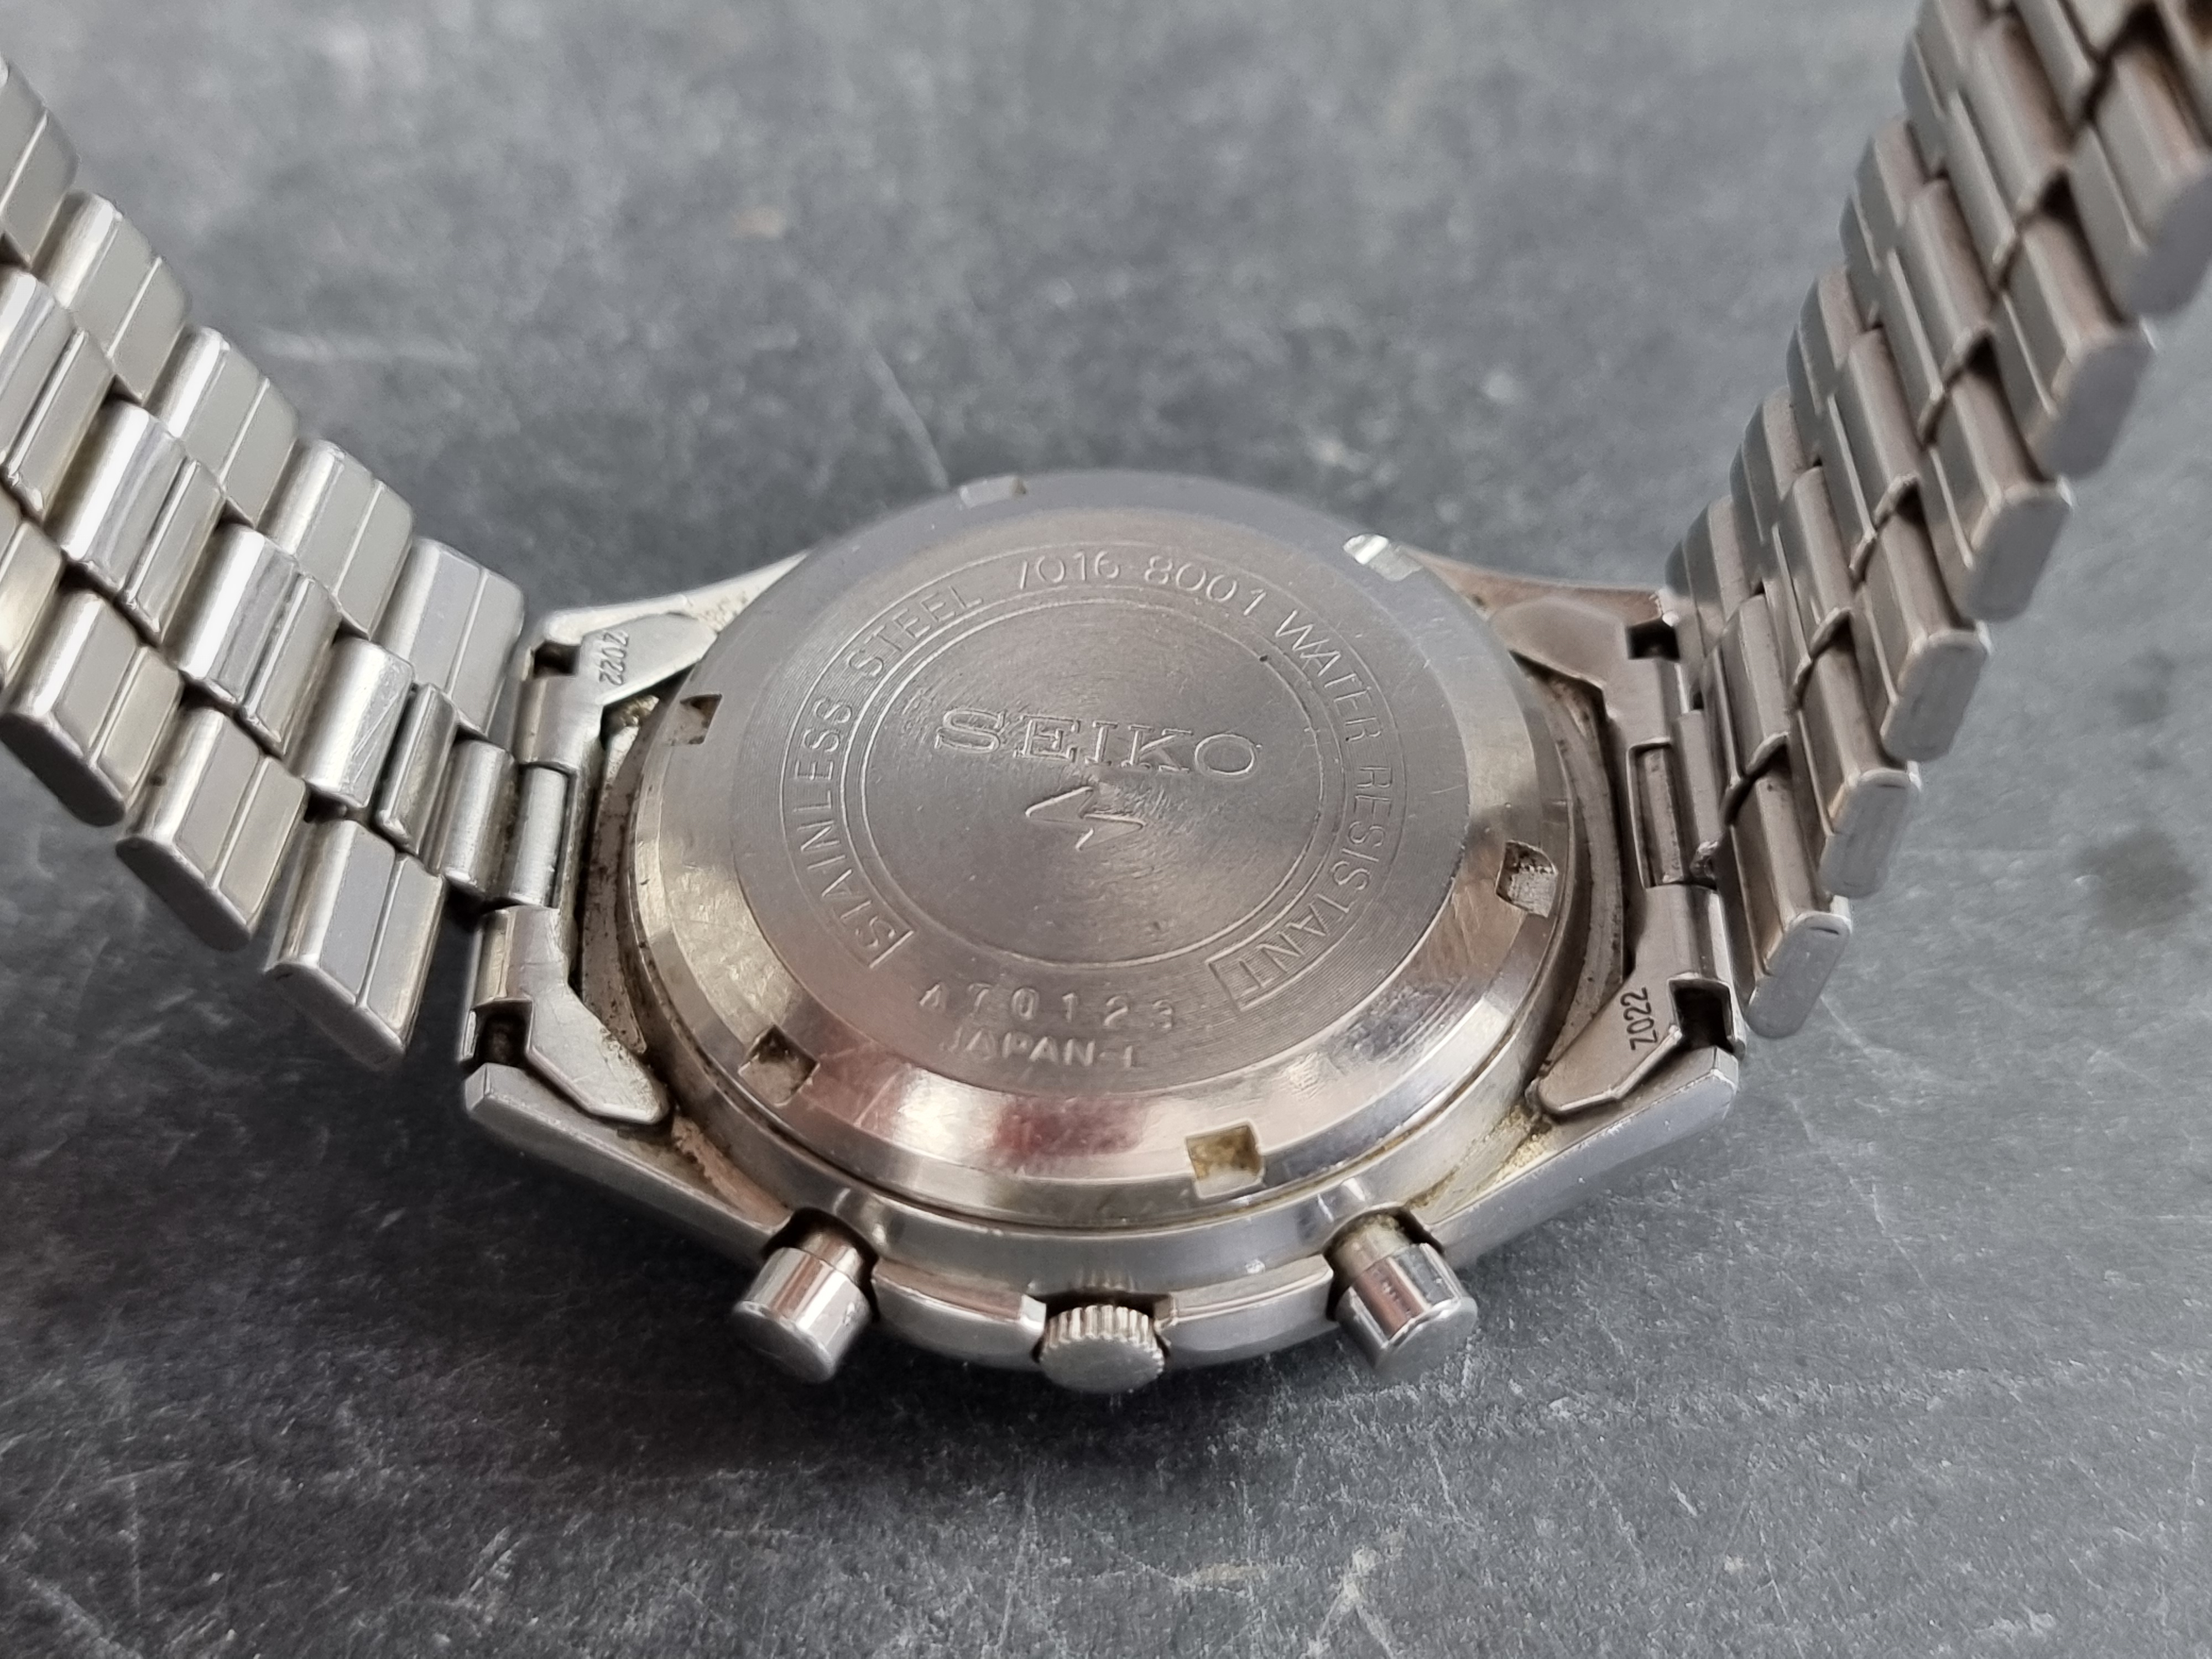 A Seiko chronograph stainless steel automatic wristwatch, 37mm, Ref. 7016-8001, on original - Image 4 of 4